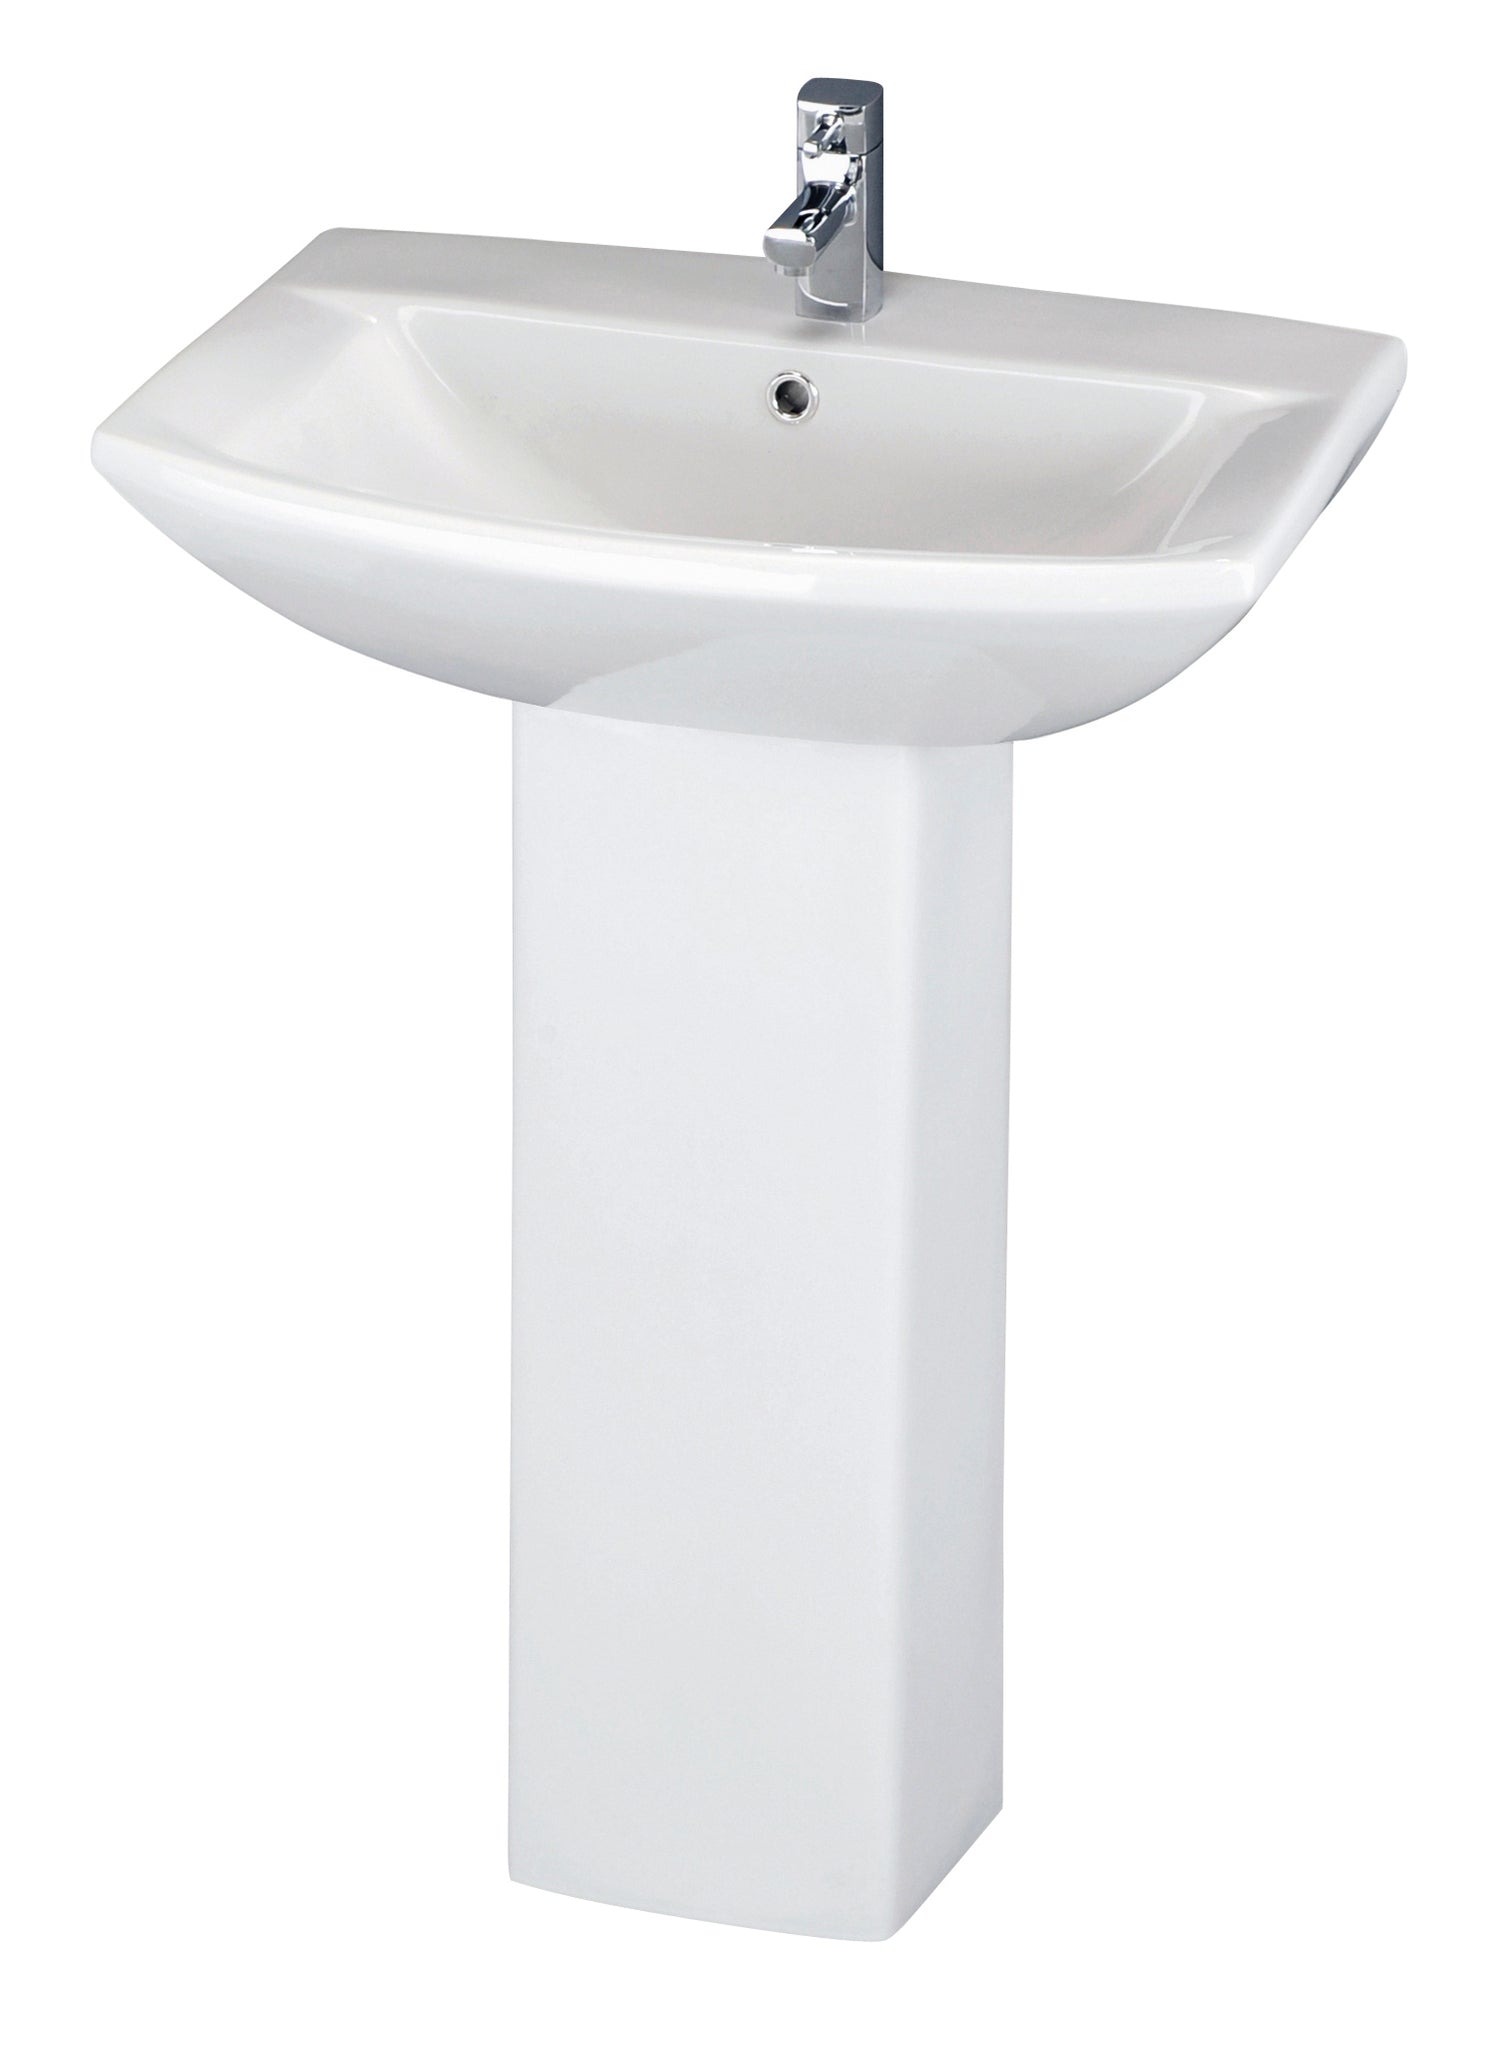 Nuie Asselby 600mm Basin & Pedestal